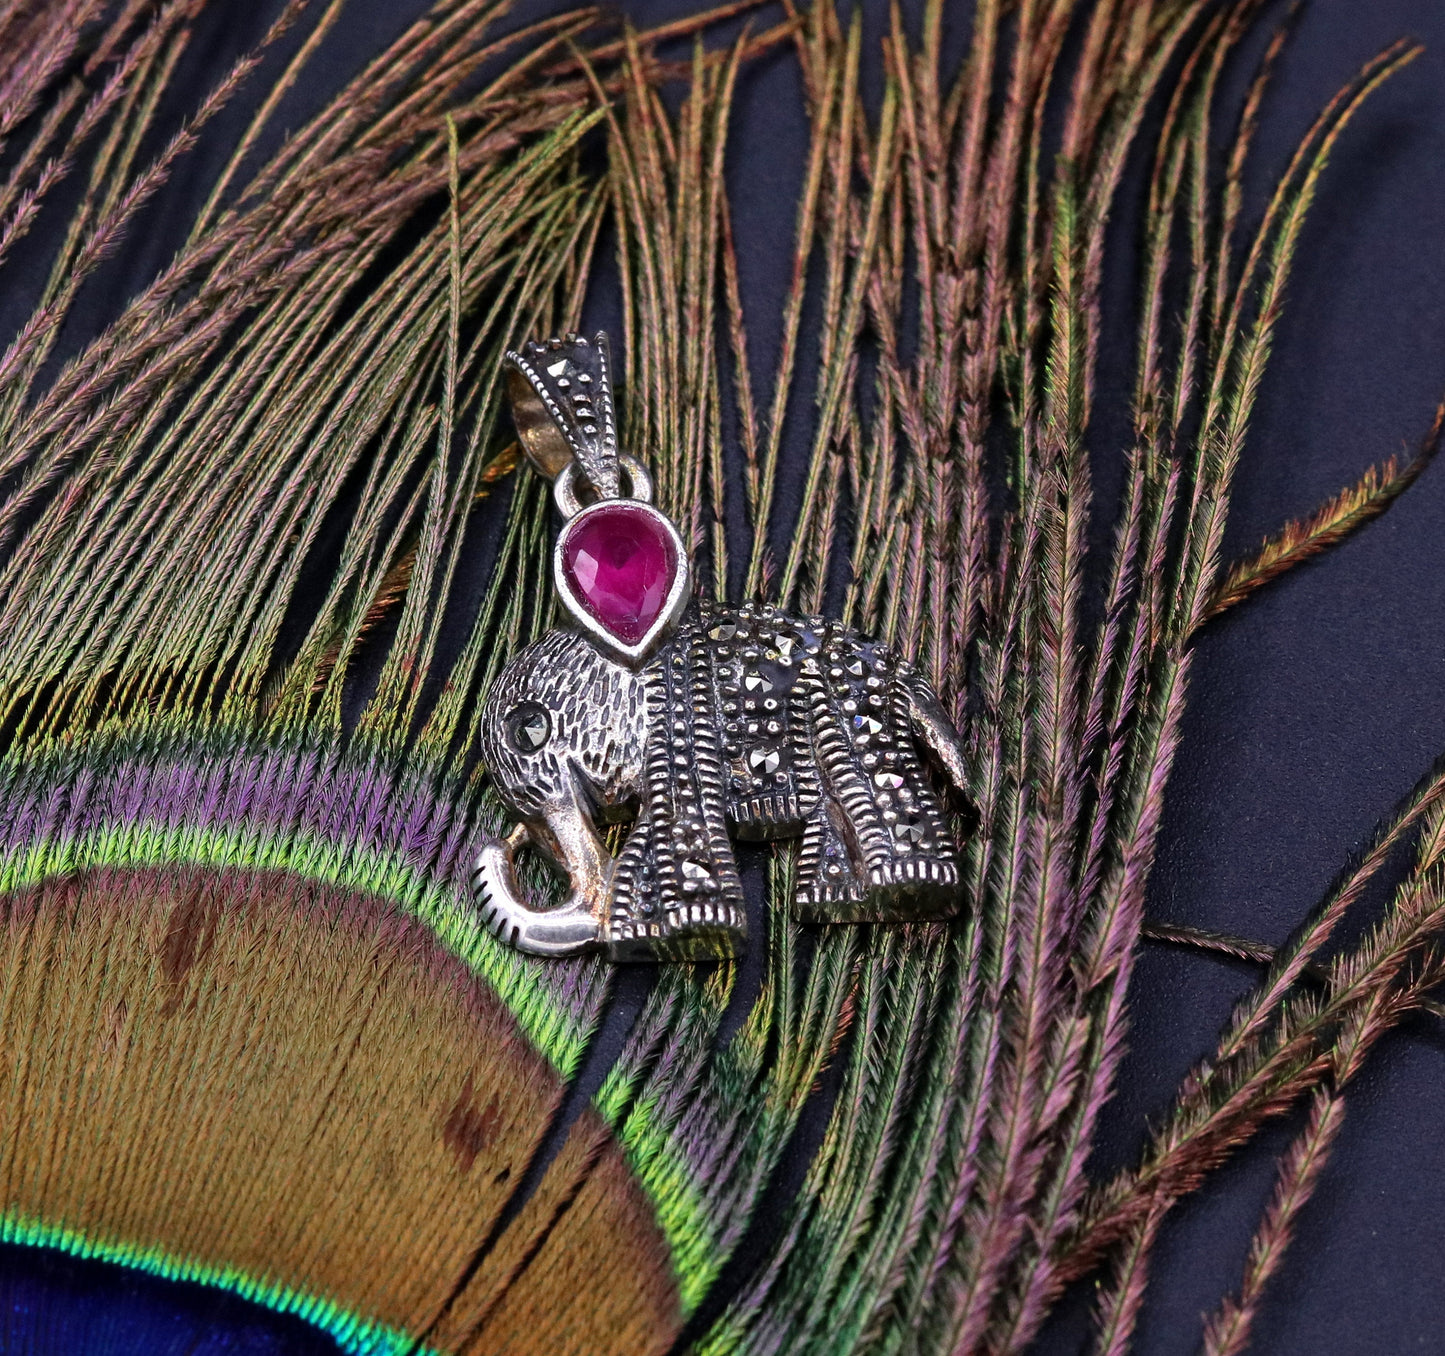 925 sterling silver handmade gorgeous Elephant pendant awesome unisex daily use jewelry from Rajasthan India nsp40 nsp40 - TRIBAL ORNAMENTS